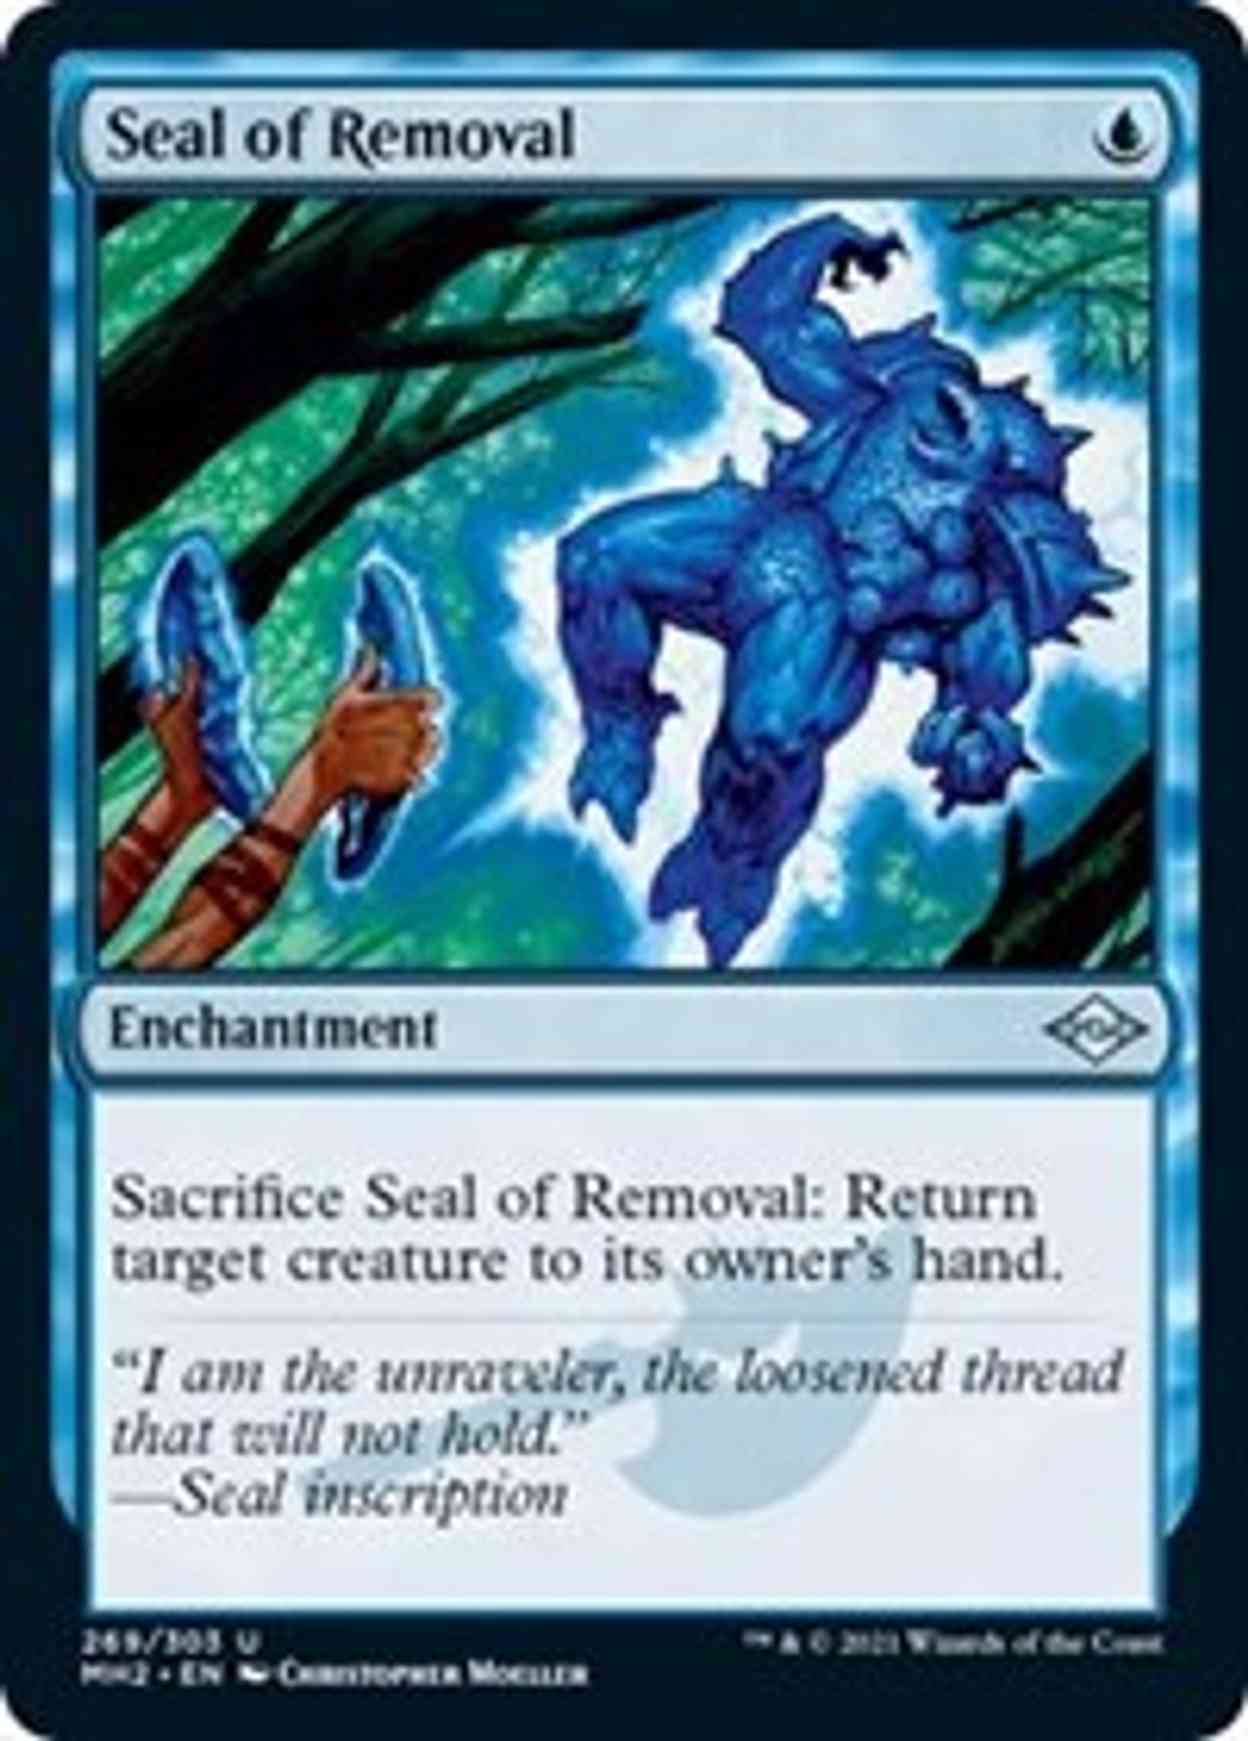 Seal of Removal (Foil Etched) magic card front